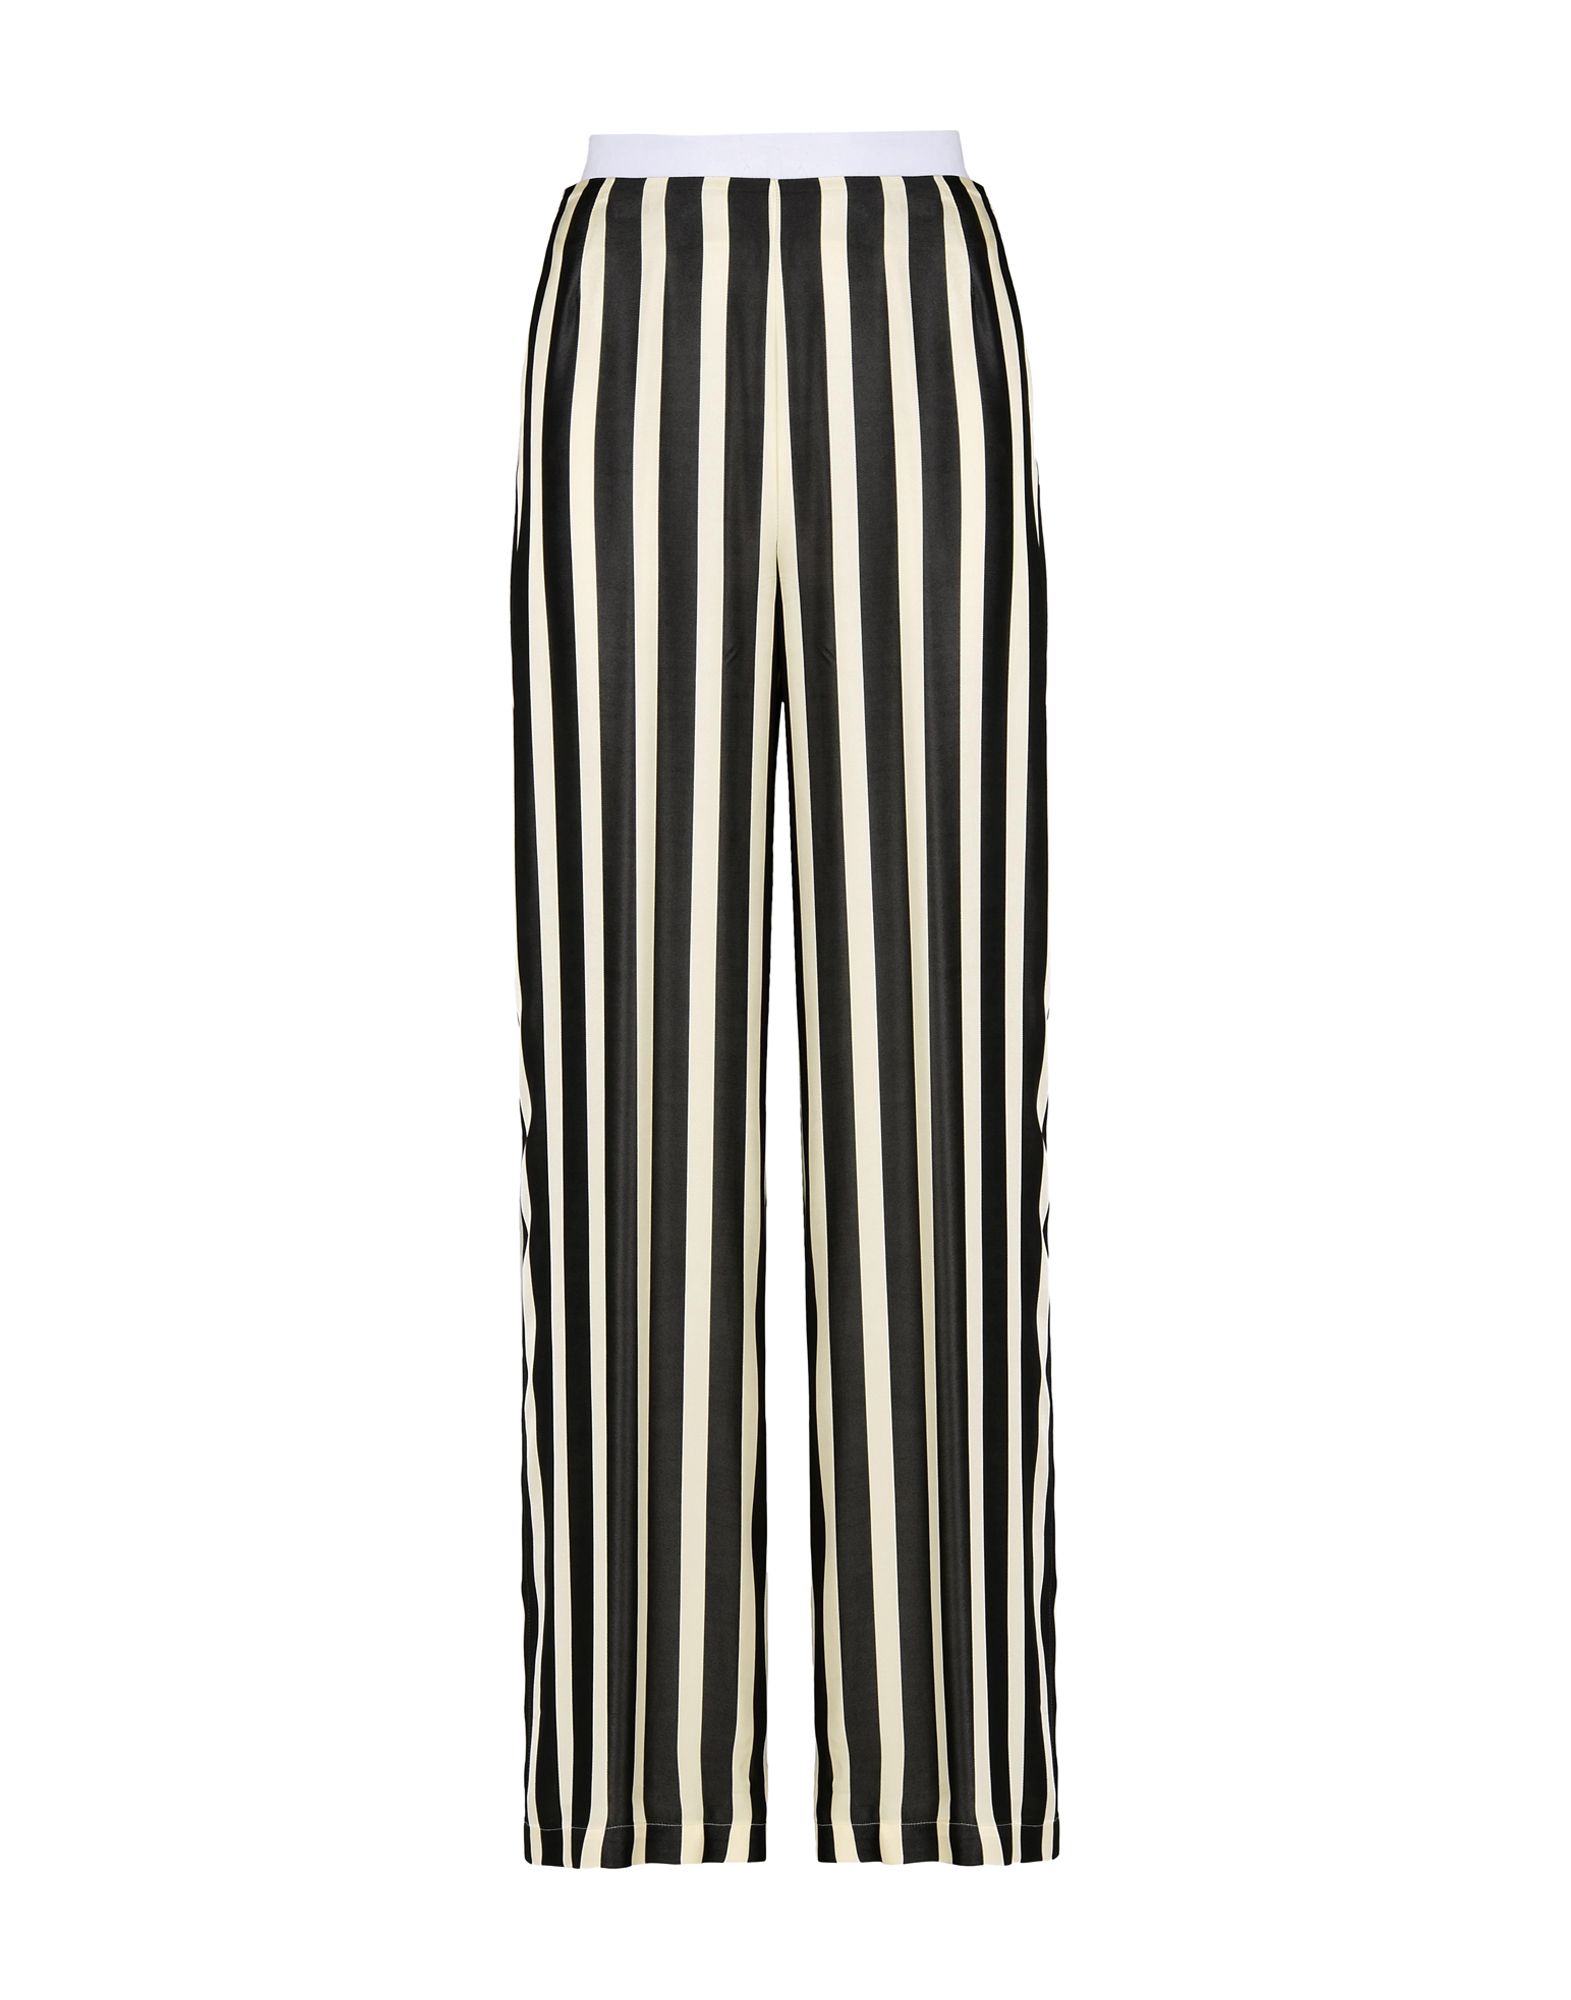 A Beginner's Guide to Styling Stripes